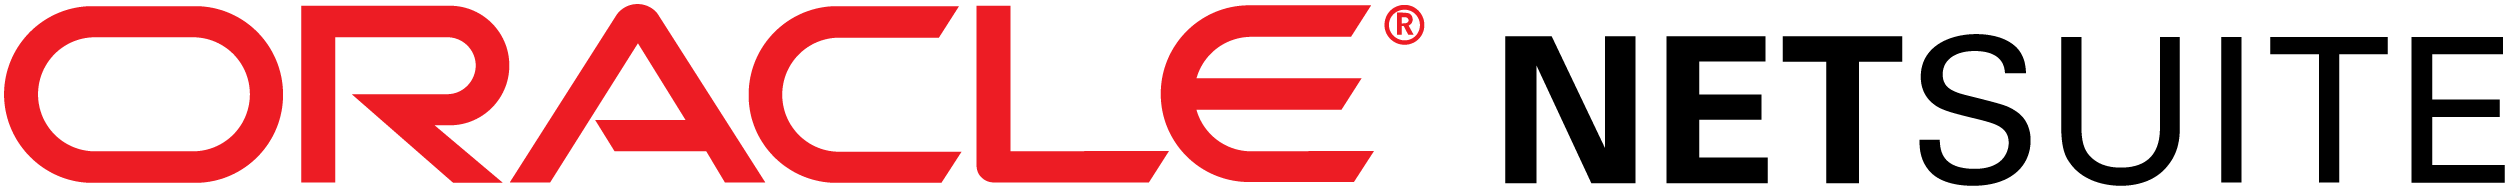 oracle netsuite logo for certifications